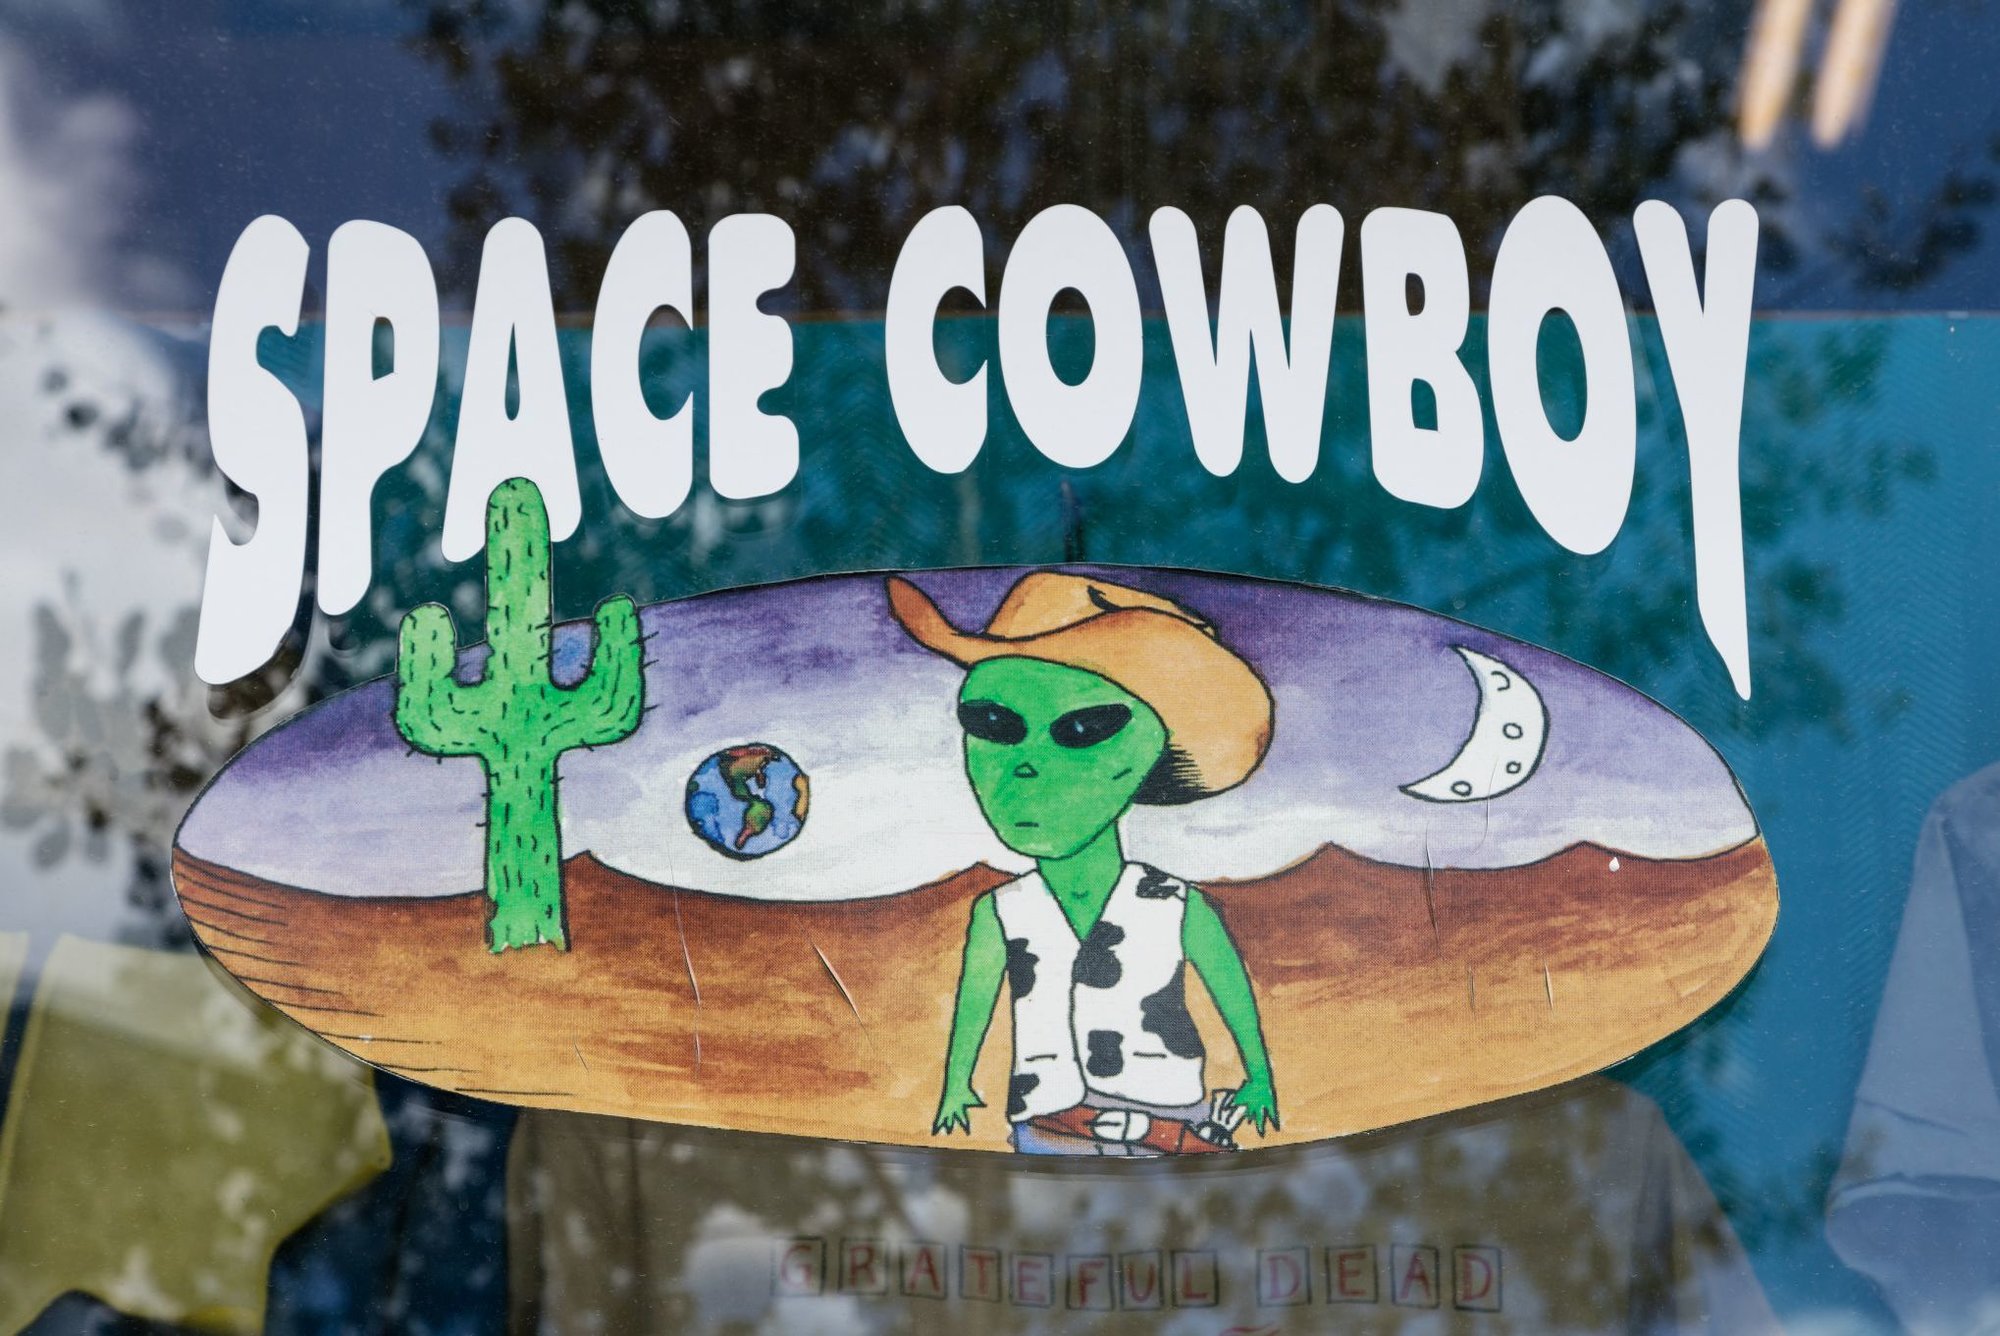 Window of the Space Cowboy Smoke Shop, which calls itself “the highest head shop in the world,” in Breckenridge, Colorado, on Aug. 8, 2015. This photo by Carol M. Highsmith is now in the Library of Congress.